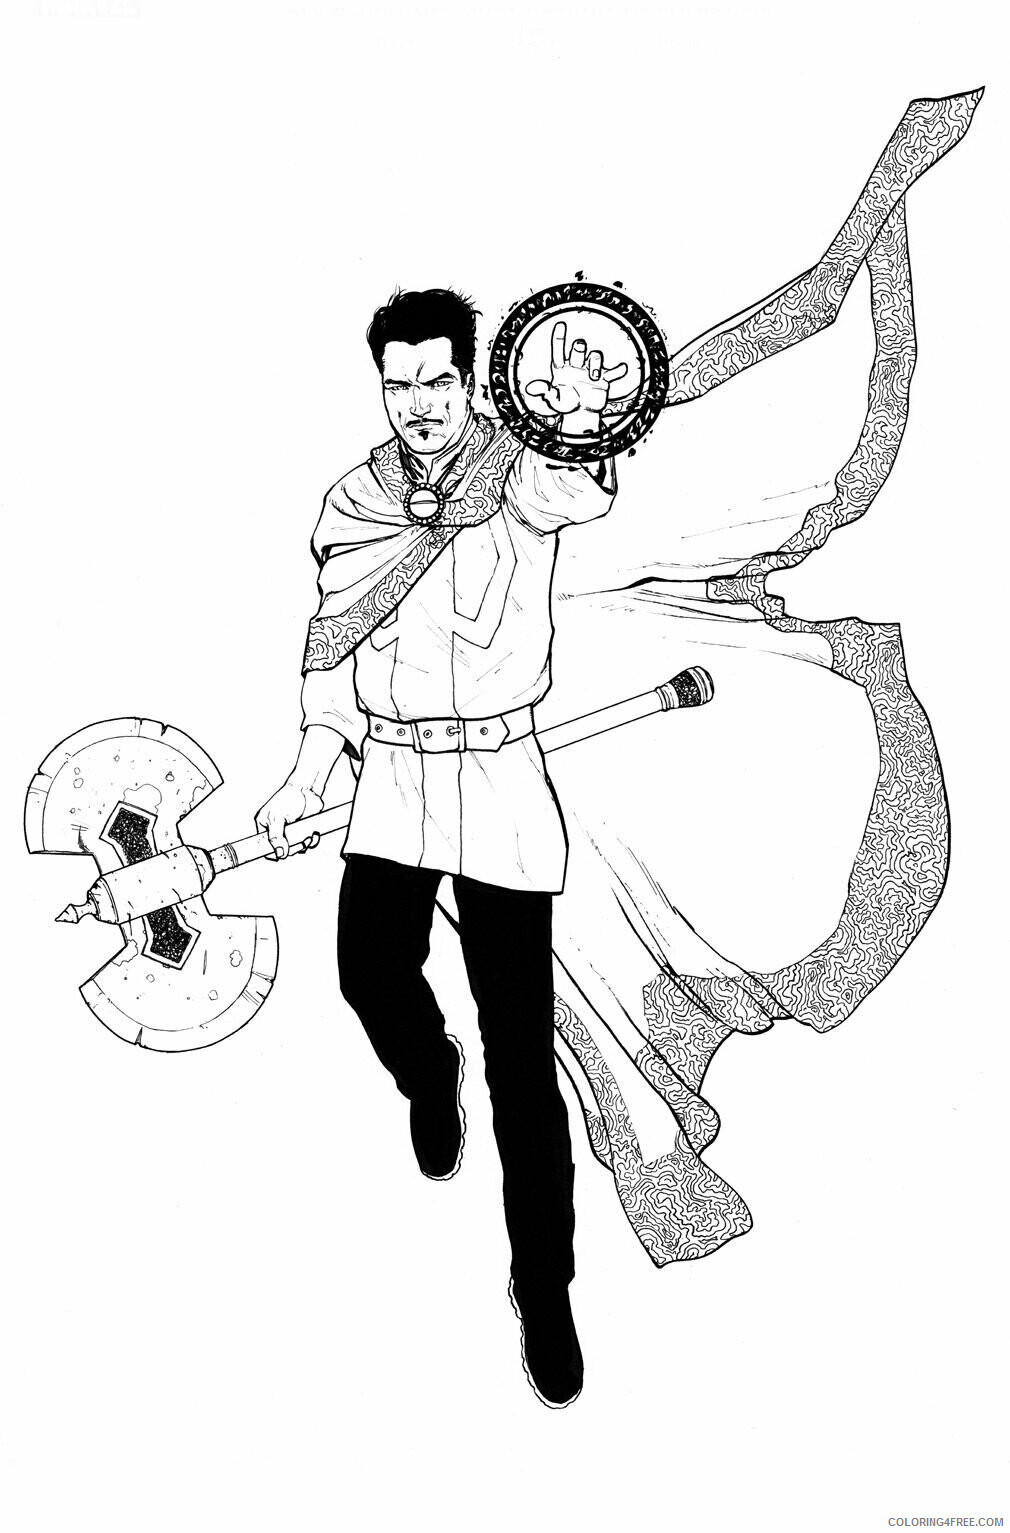 Axe Coloring Pages Printable Sheets Doctor Strange With Magic Axe 2021 a 4315 Coloring4free